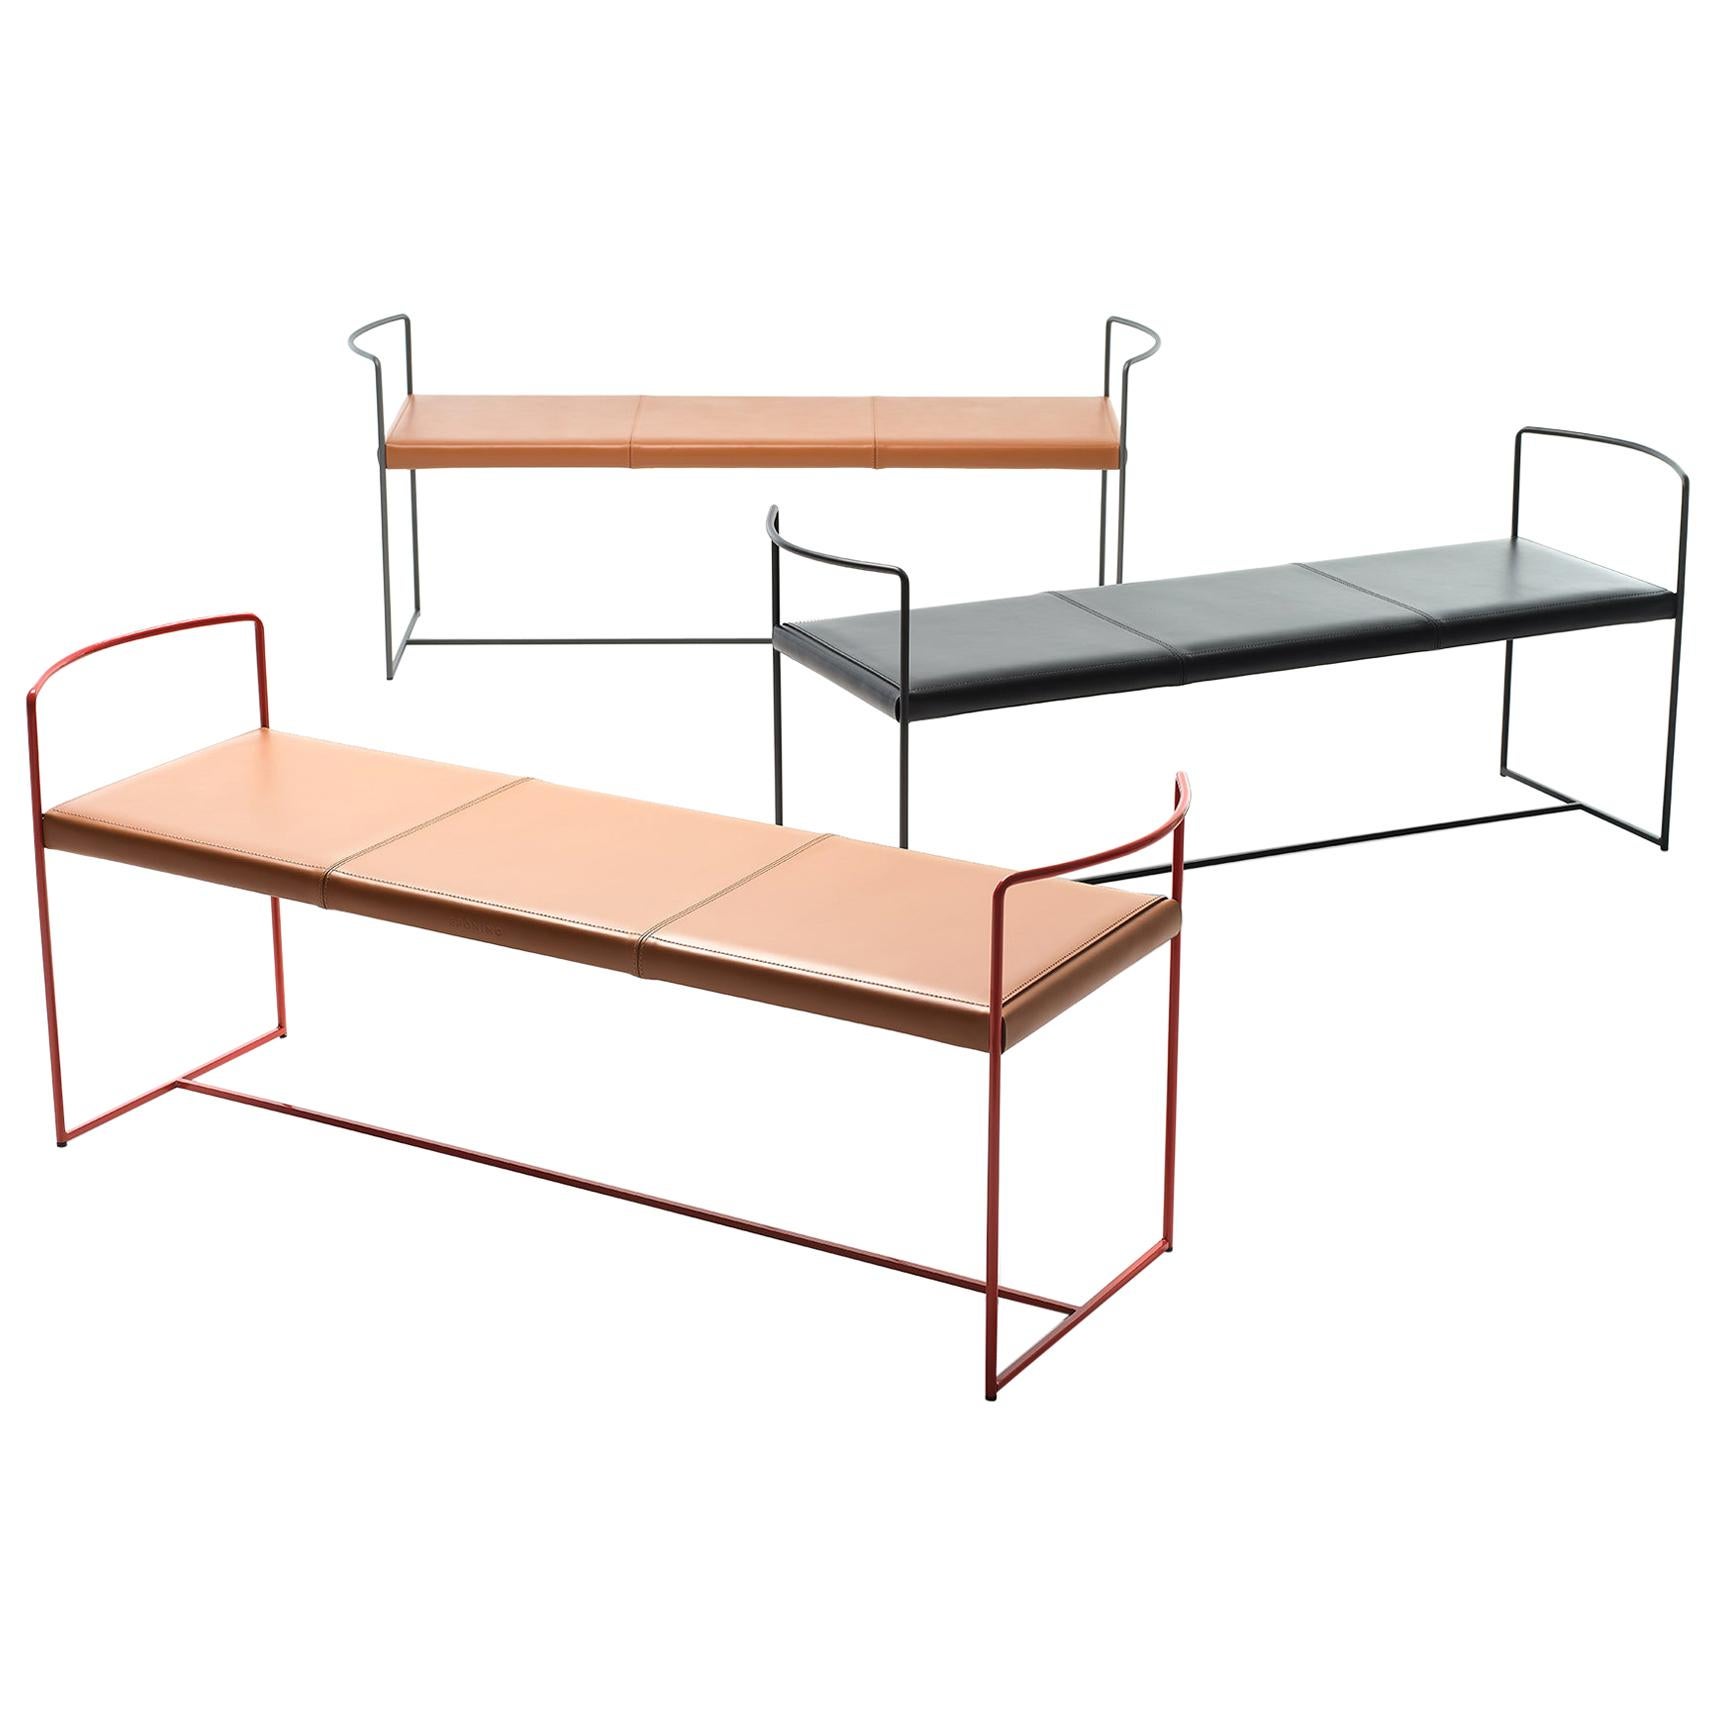 21st Century Modern Bench With Painted Steel Structure And Hide Leather Seat For Sale